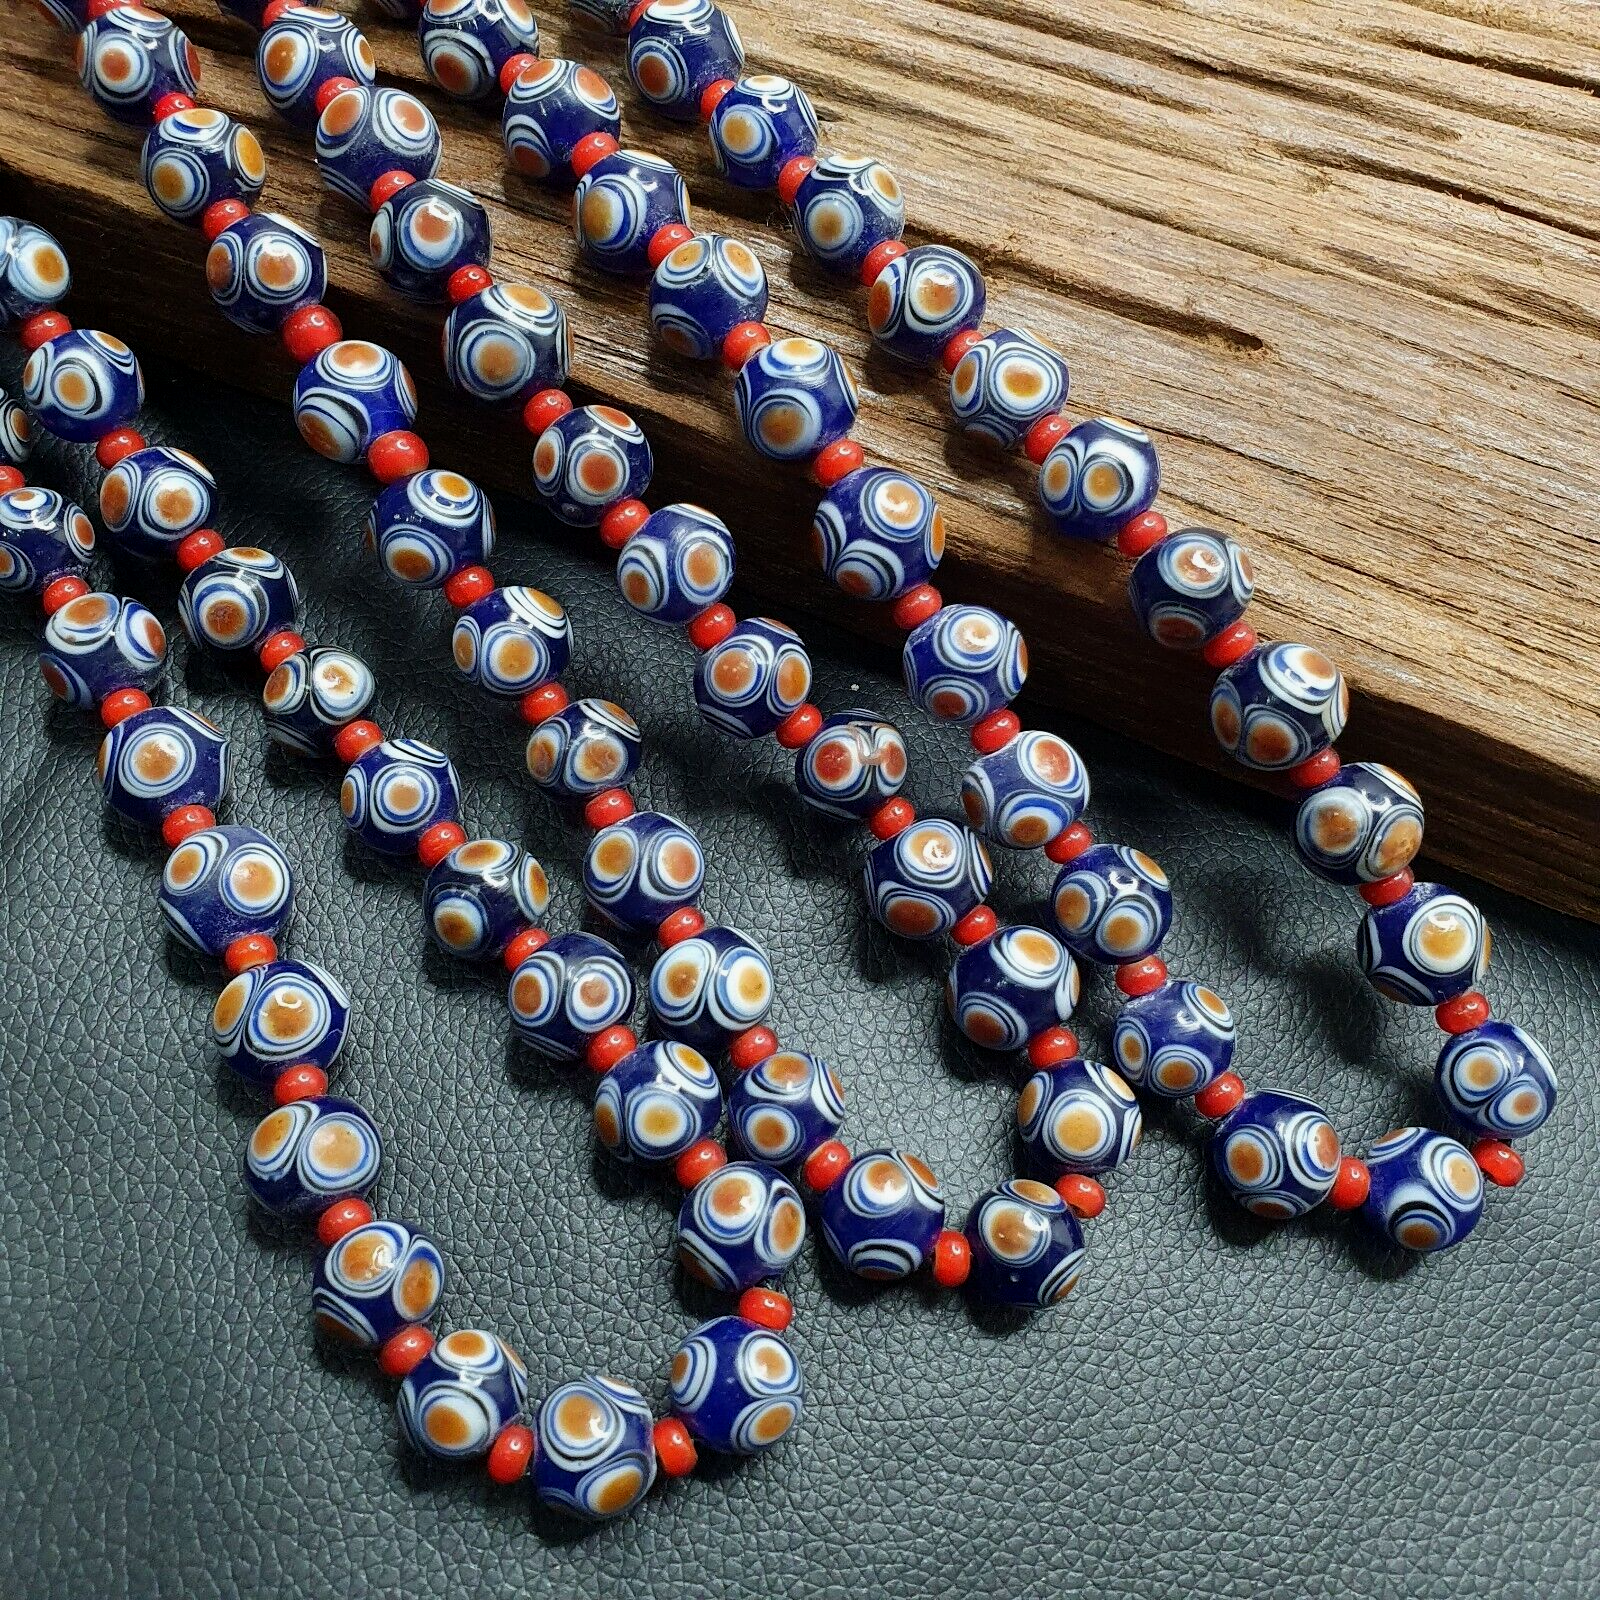 Amazing Hundred Eyes beads with venetian Red Whiteheart beads Necklace